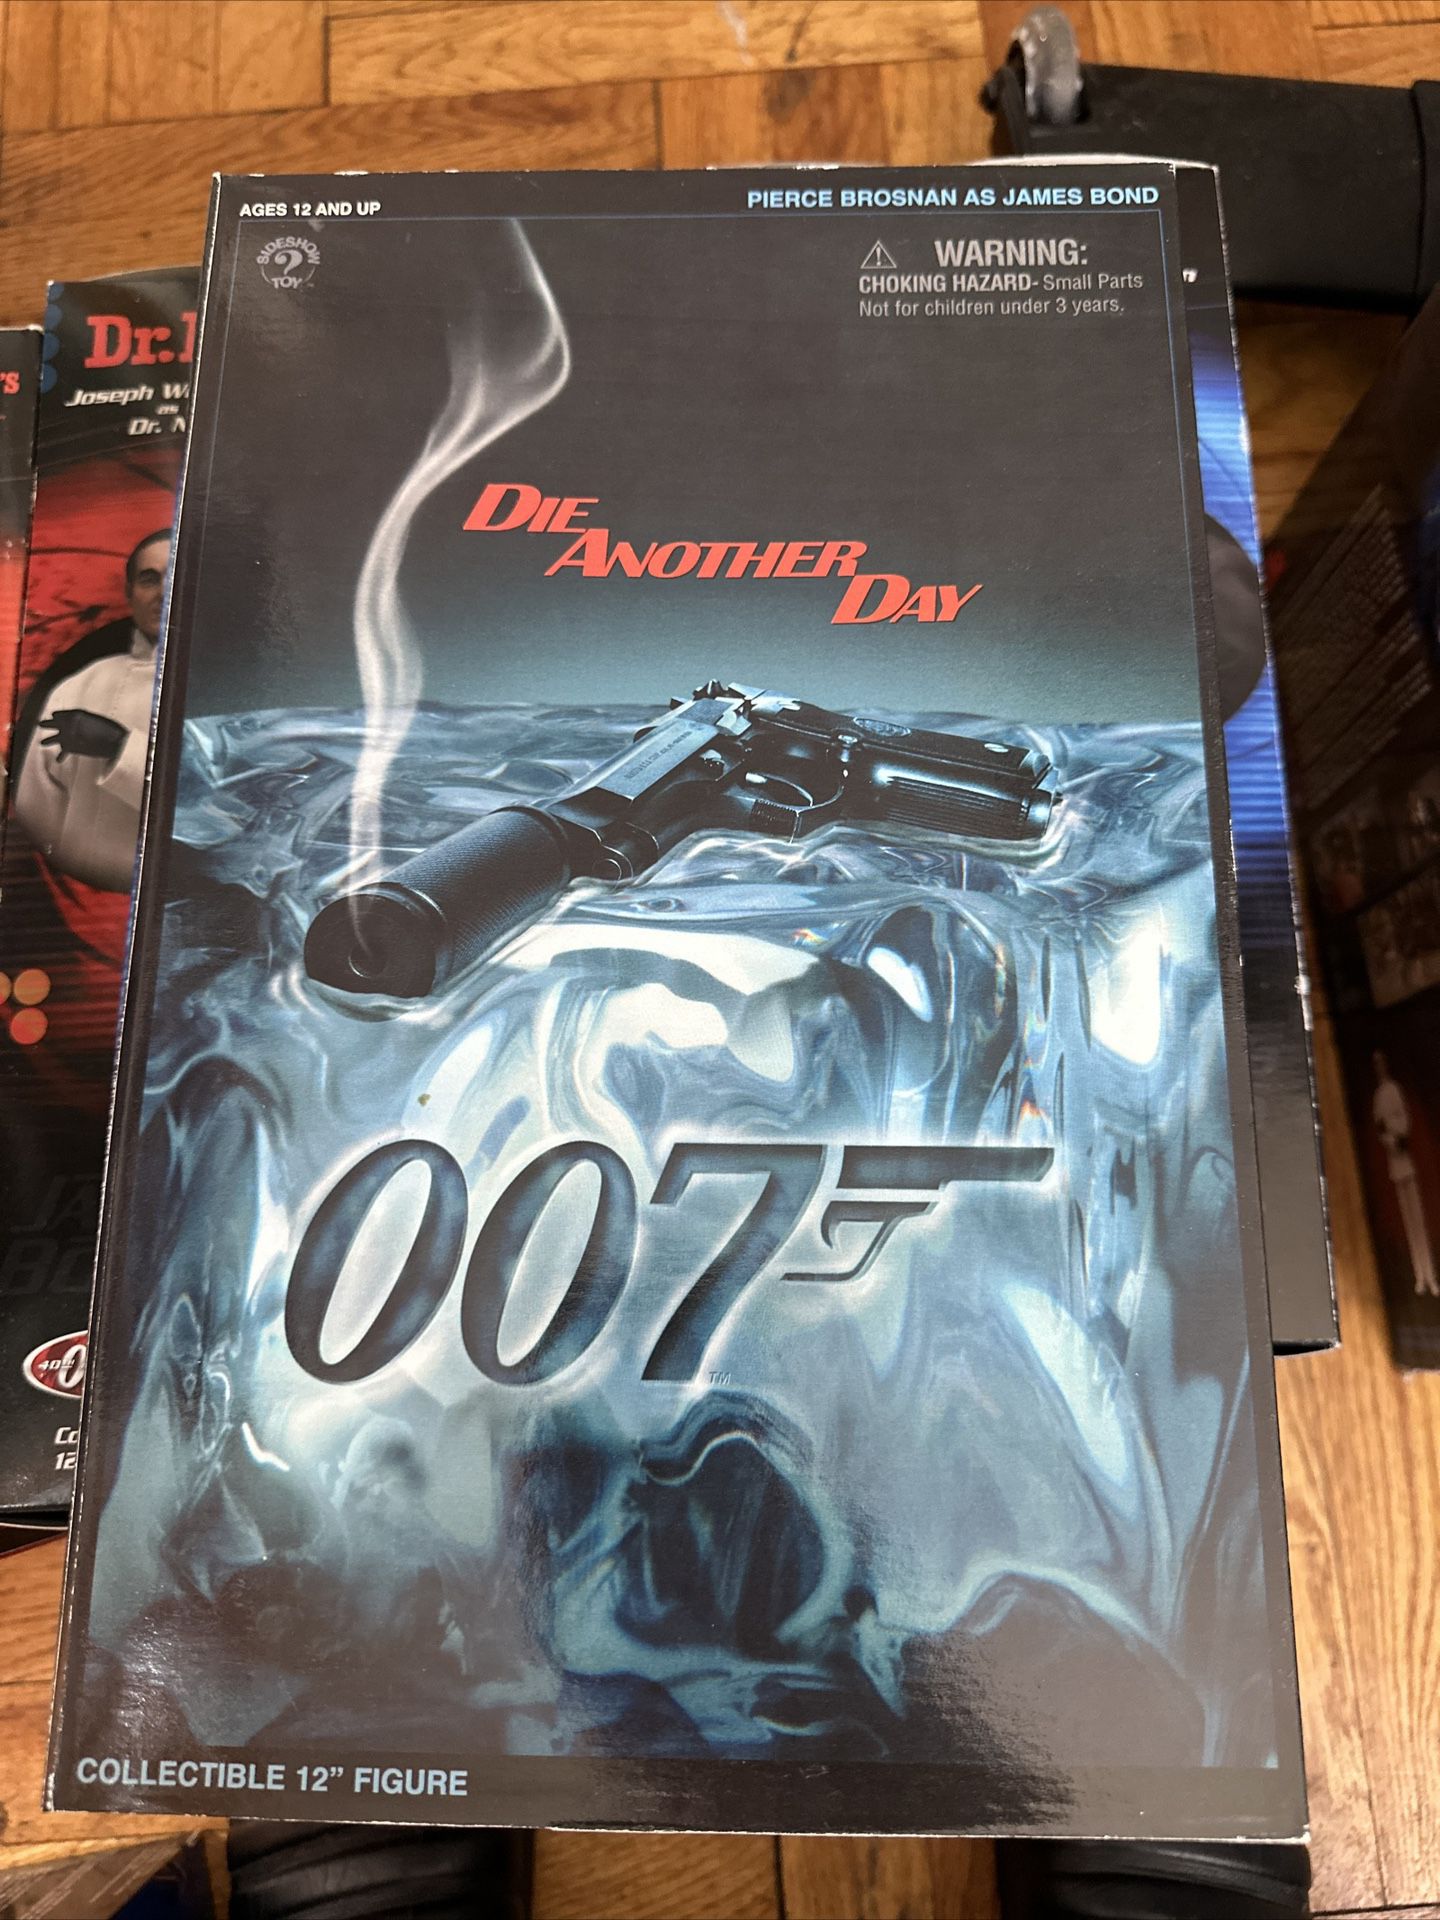 NEW 007 Die Another Day Pierce Brosnan as James Bond Sideshow Toy Figure SEALED